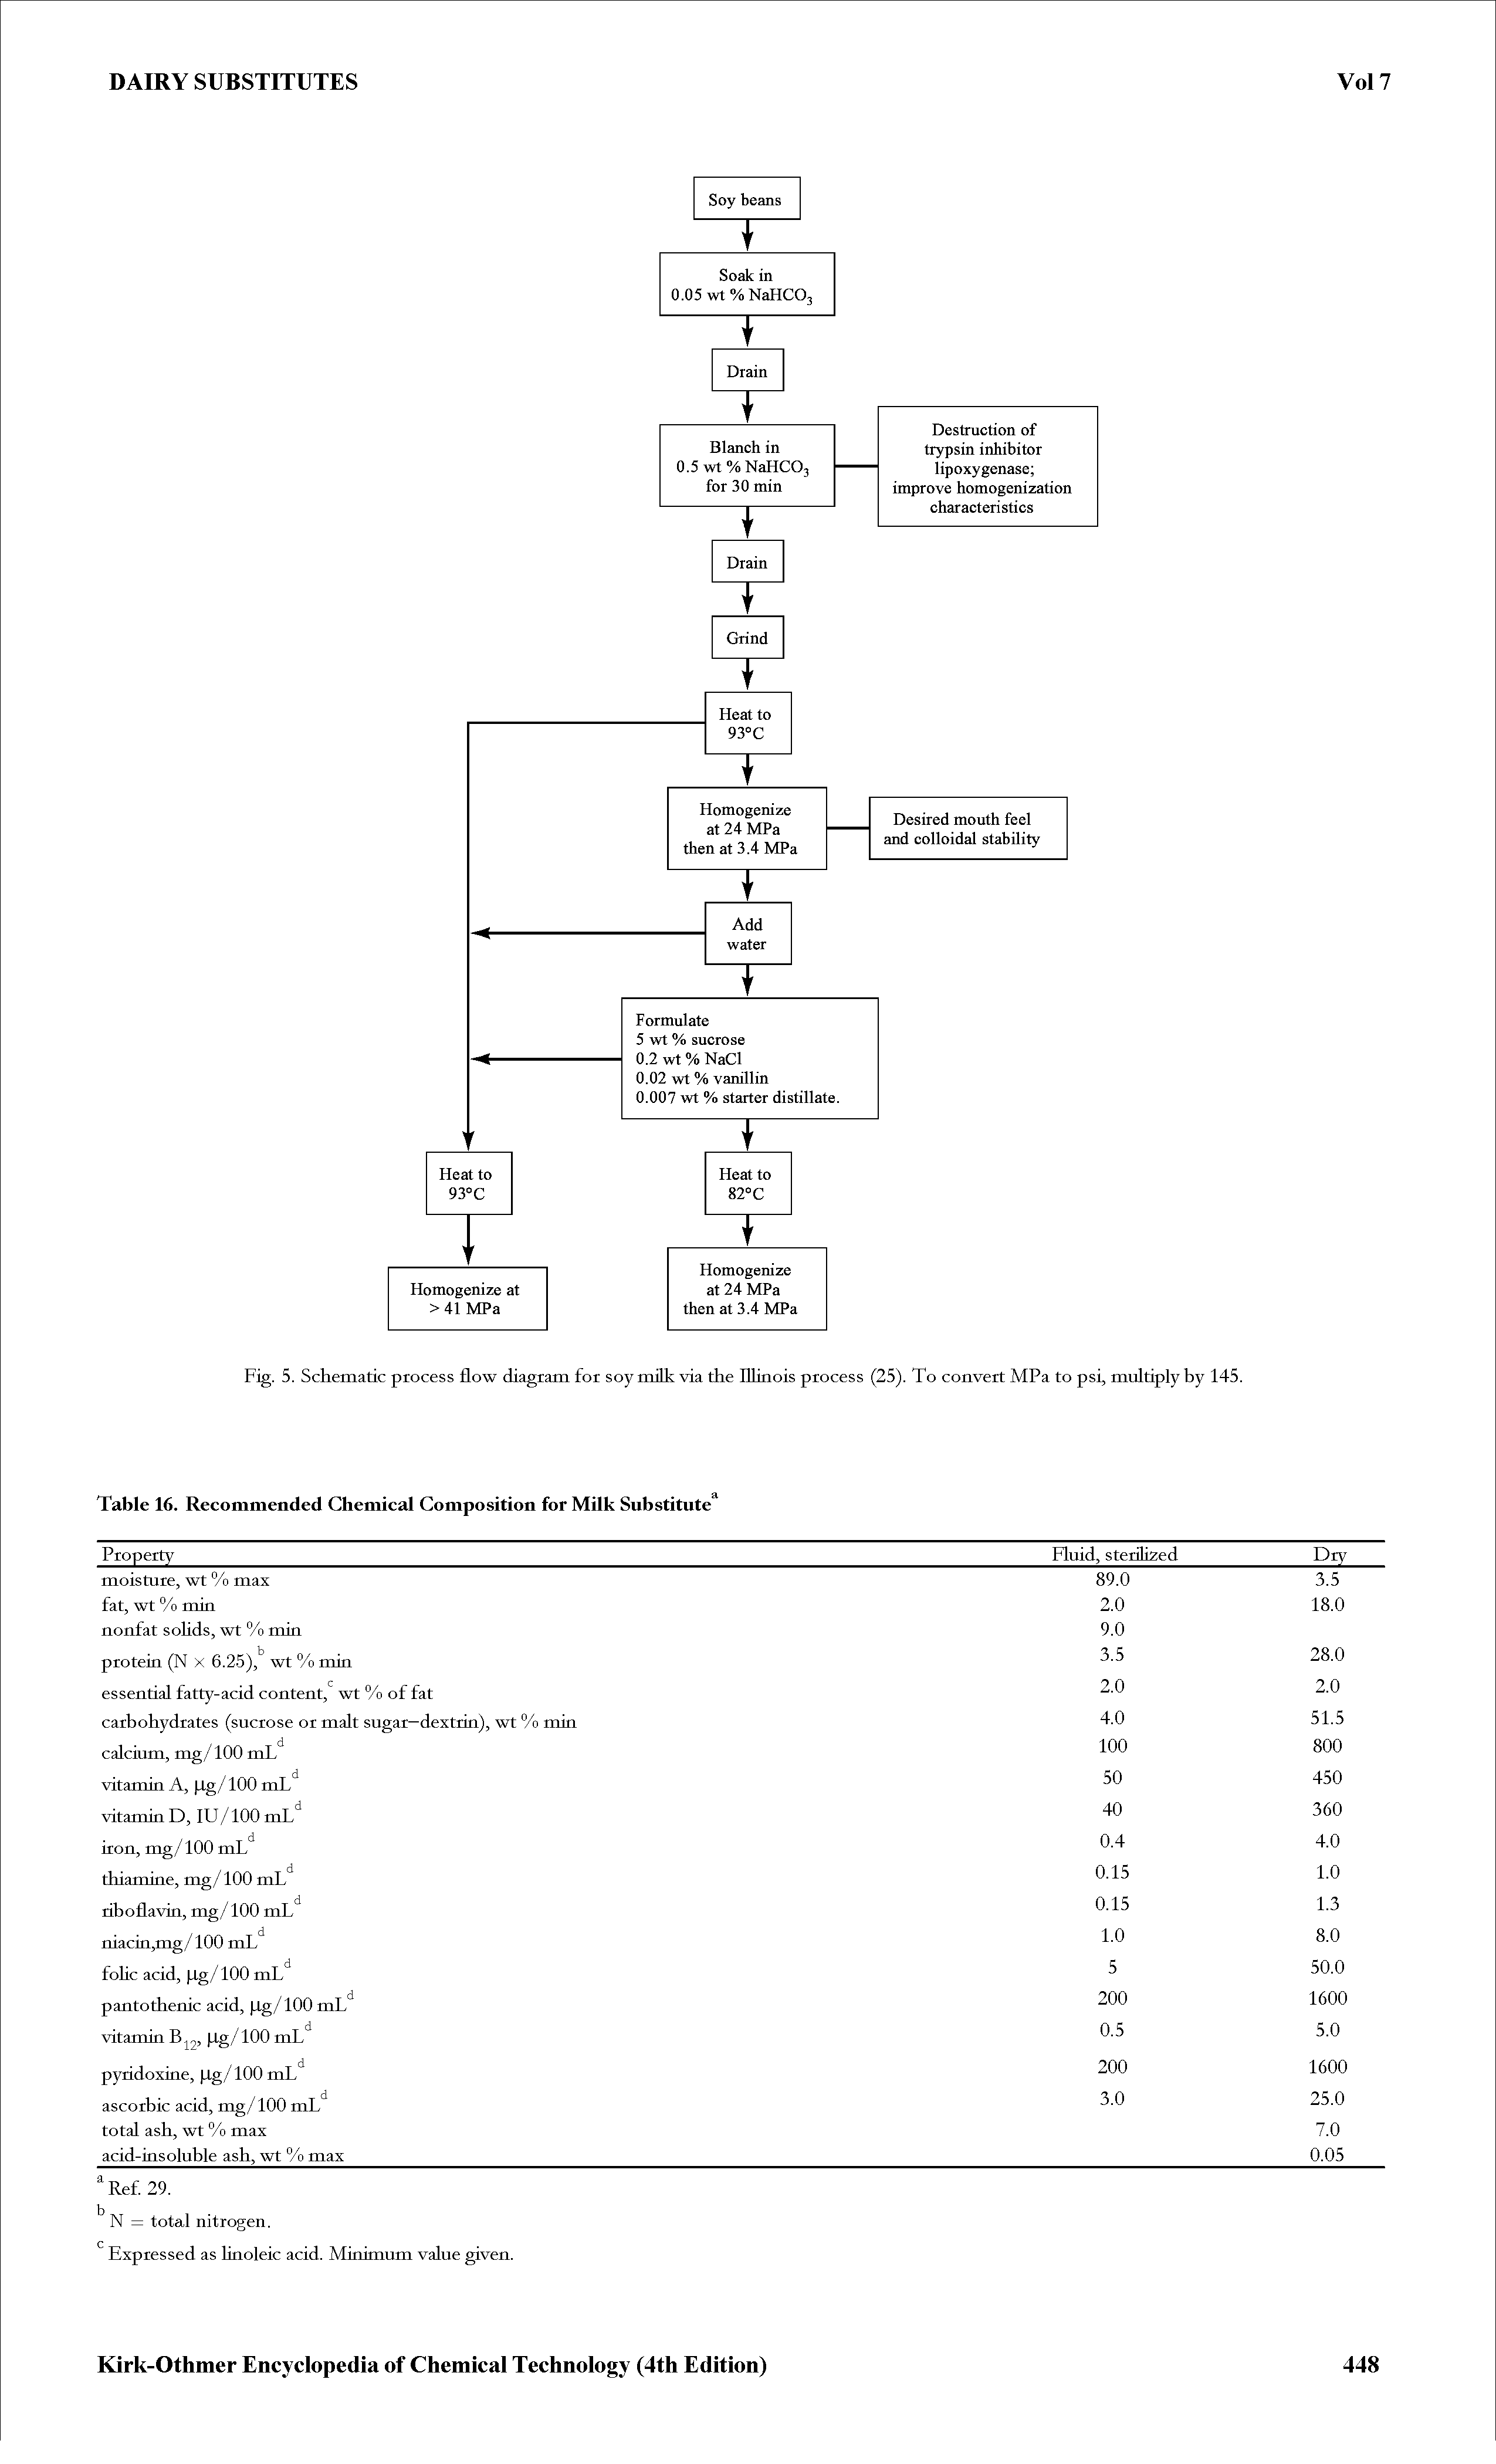 Fig. 5. Schematic process flow diagram for soy milk via the Illinois process (25). To convert MPa to psi, multiply by 145.